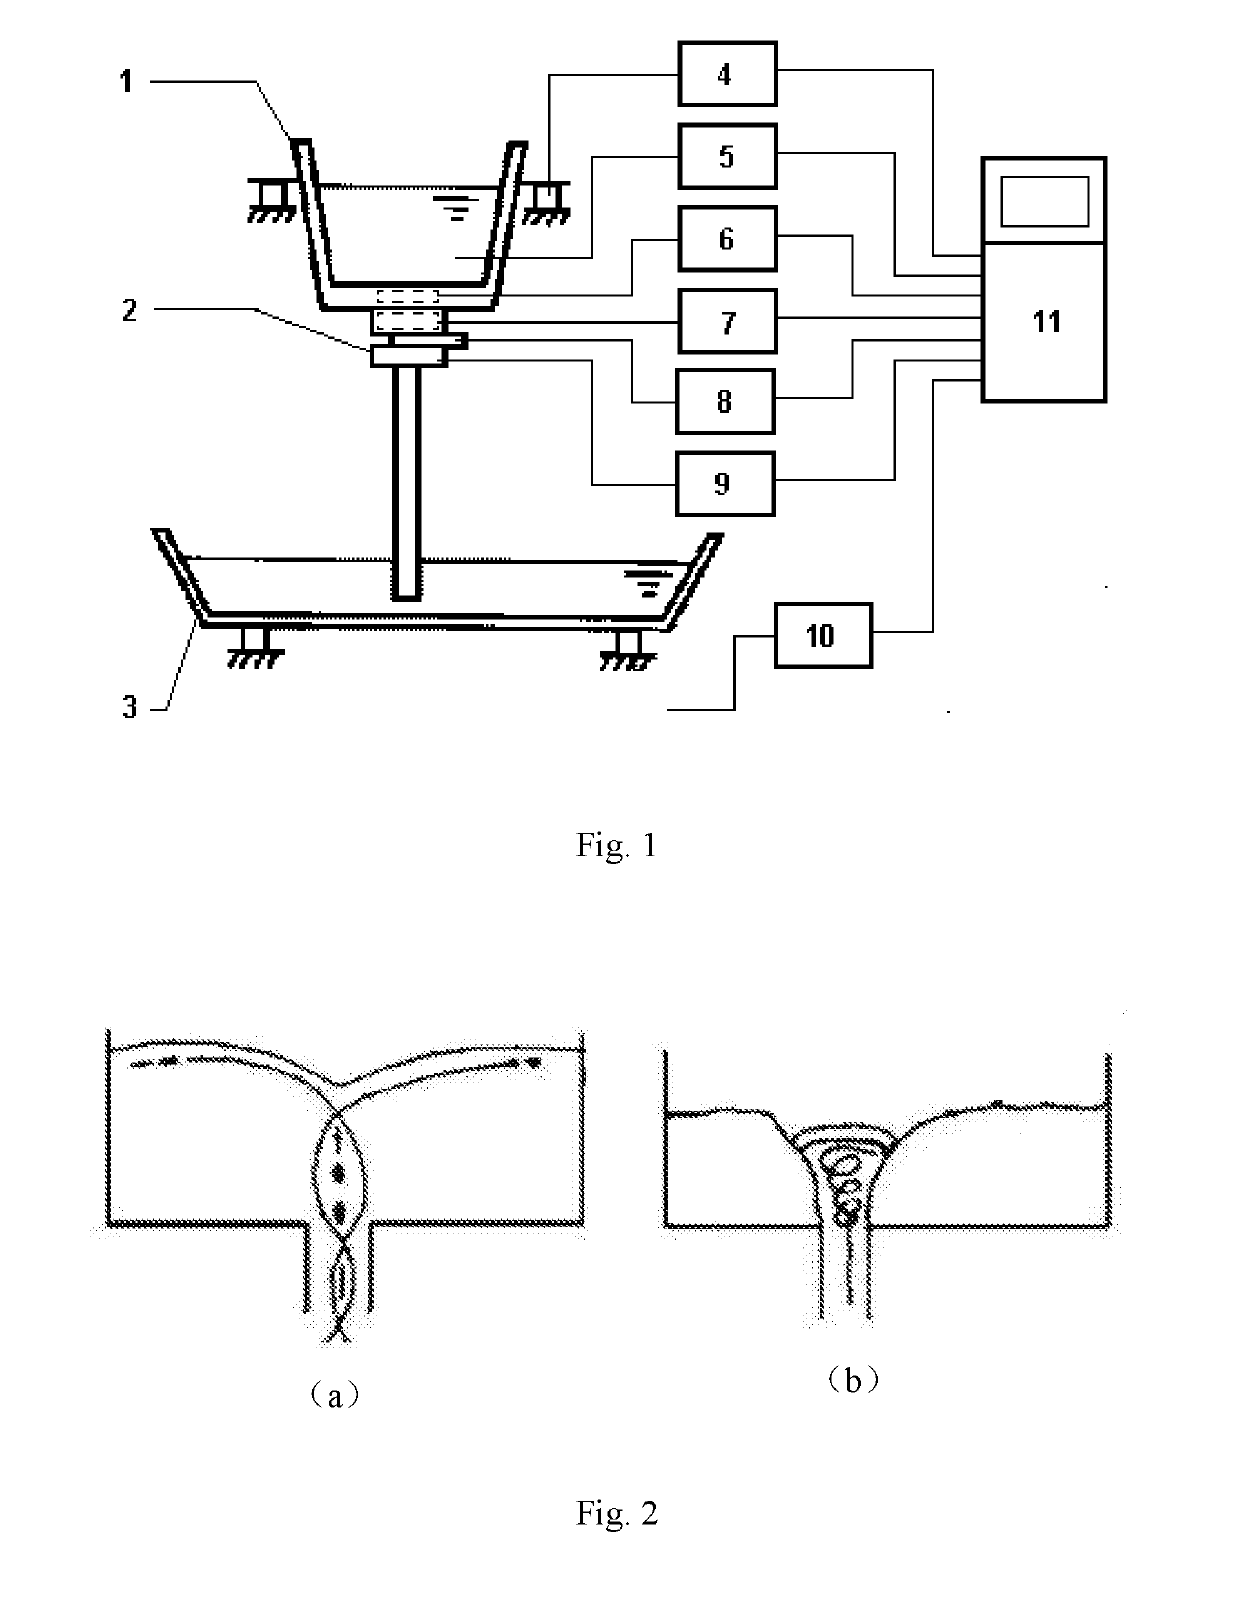 Control method and apparatus for inhibiting slag entrapment in ladle in last stage of pouring during continuous casting